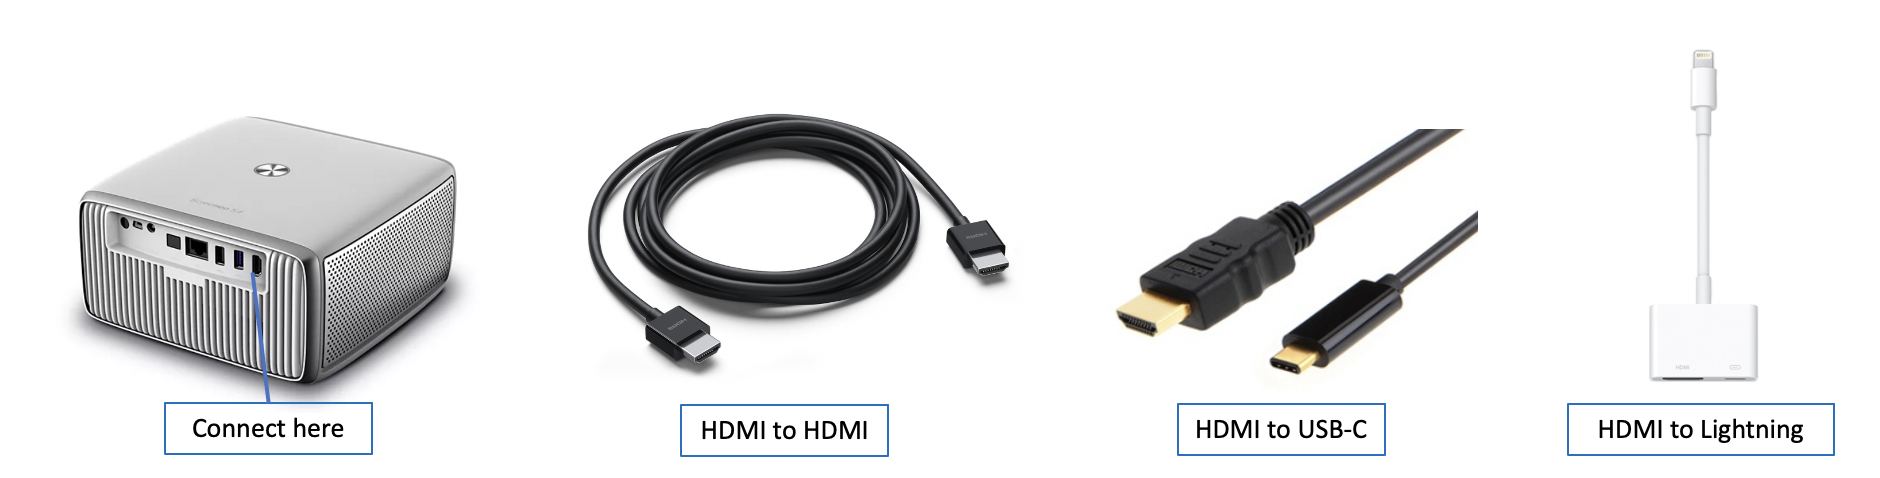 hdmi_connections_.png